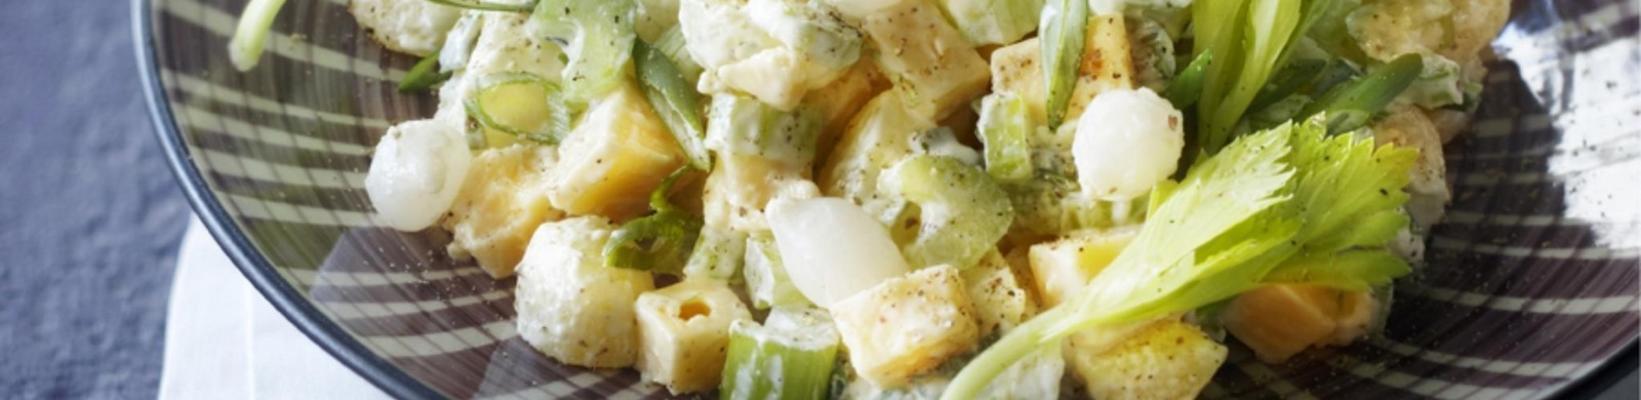 potato salad with celery and cheese